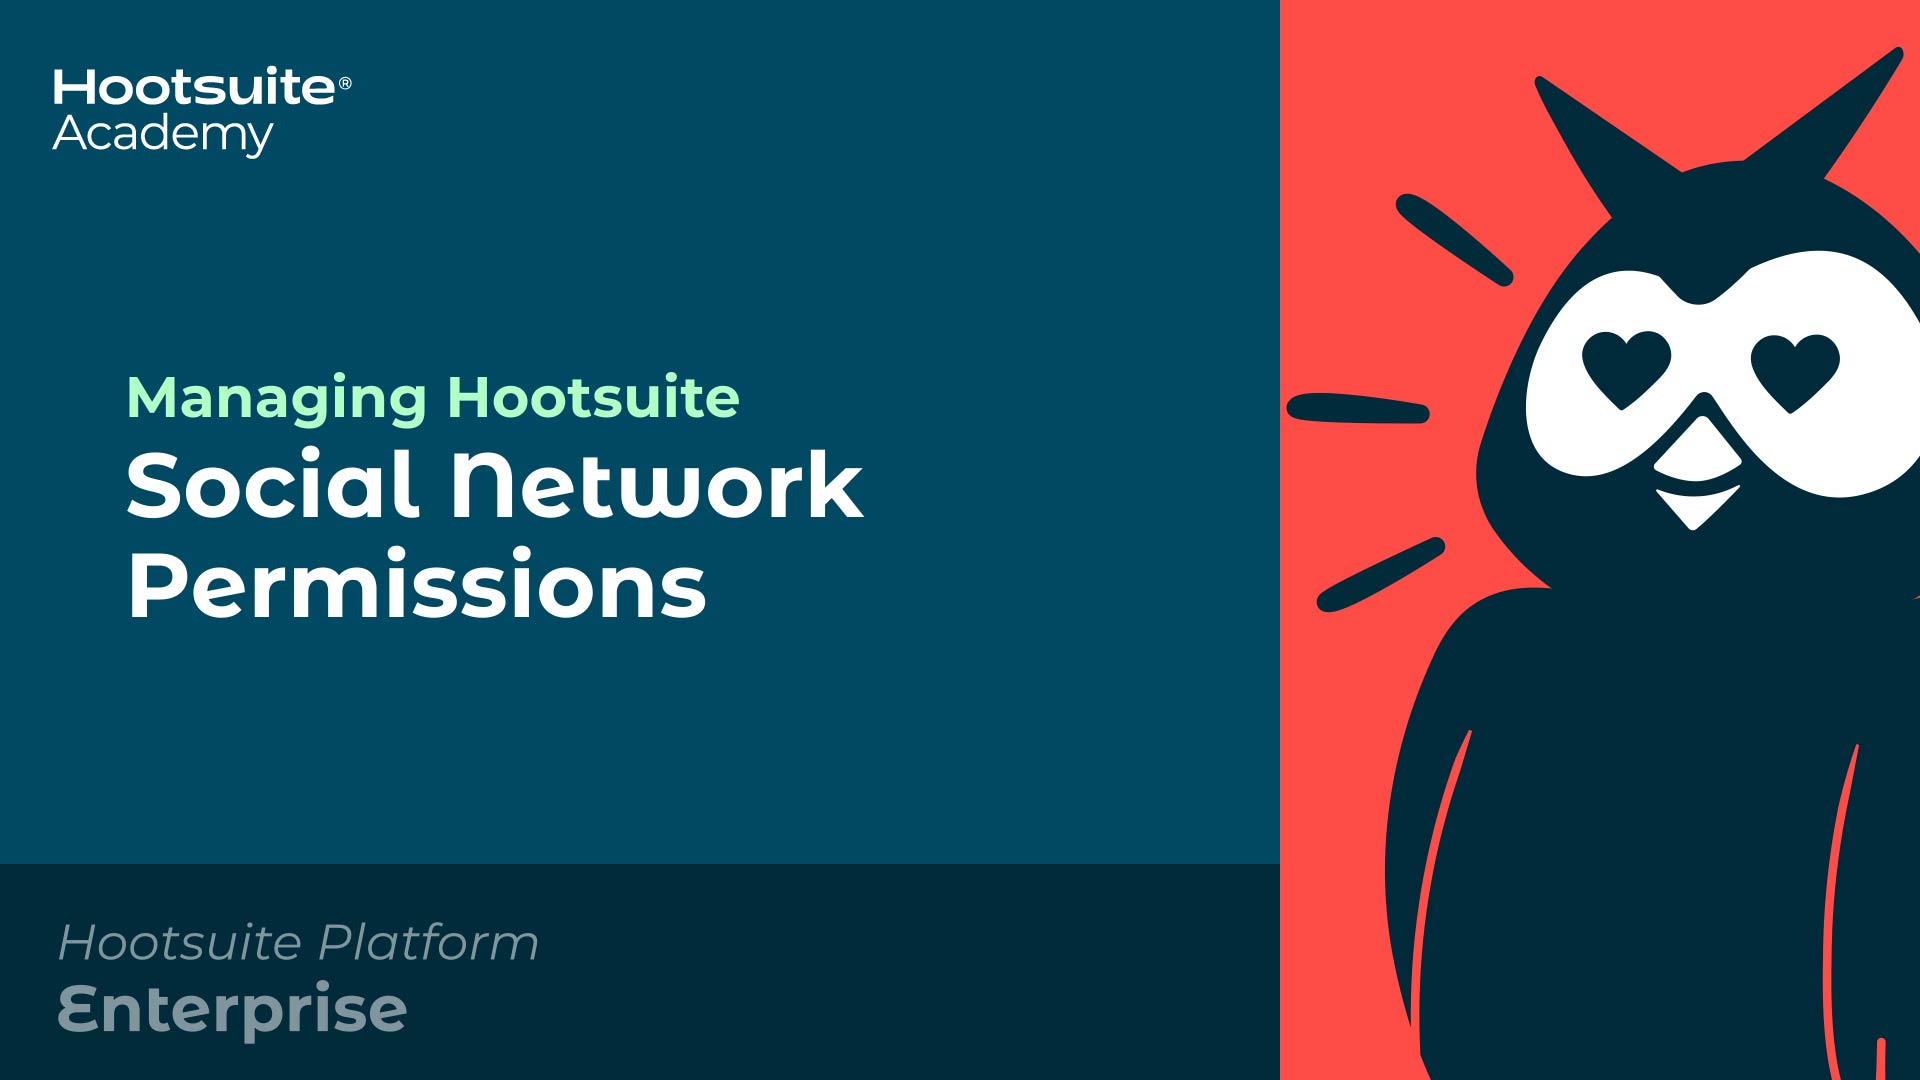 Managing Hootsuite social network permissions video.